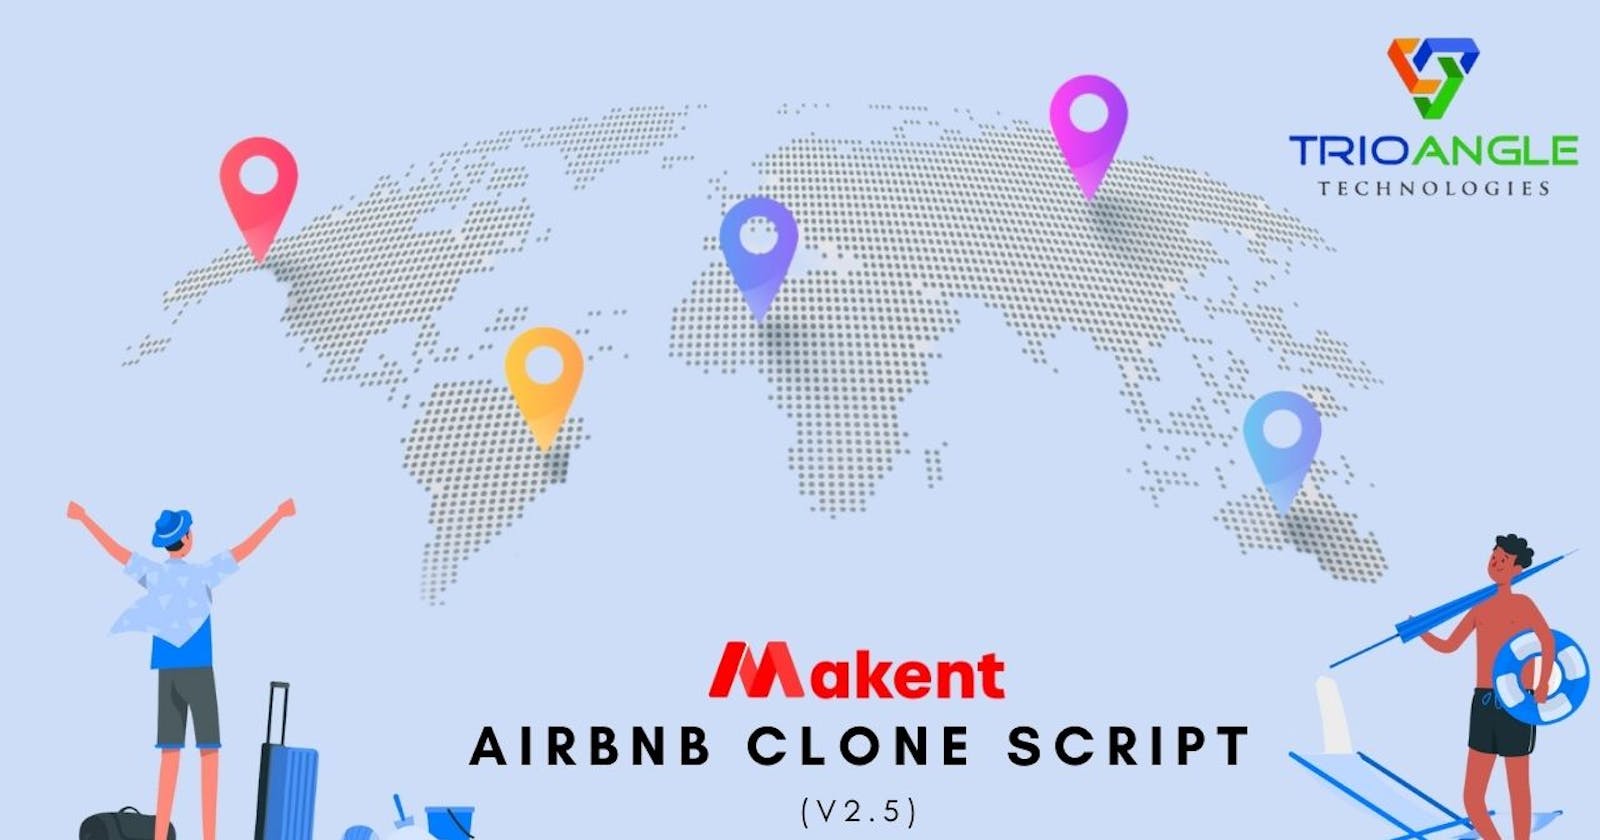 Best Airbnb Clone Script For Property Rental Business